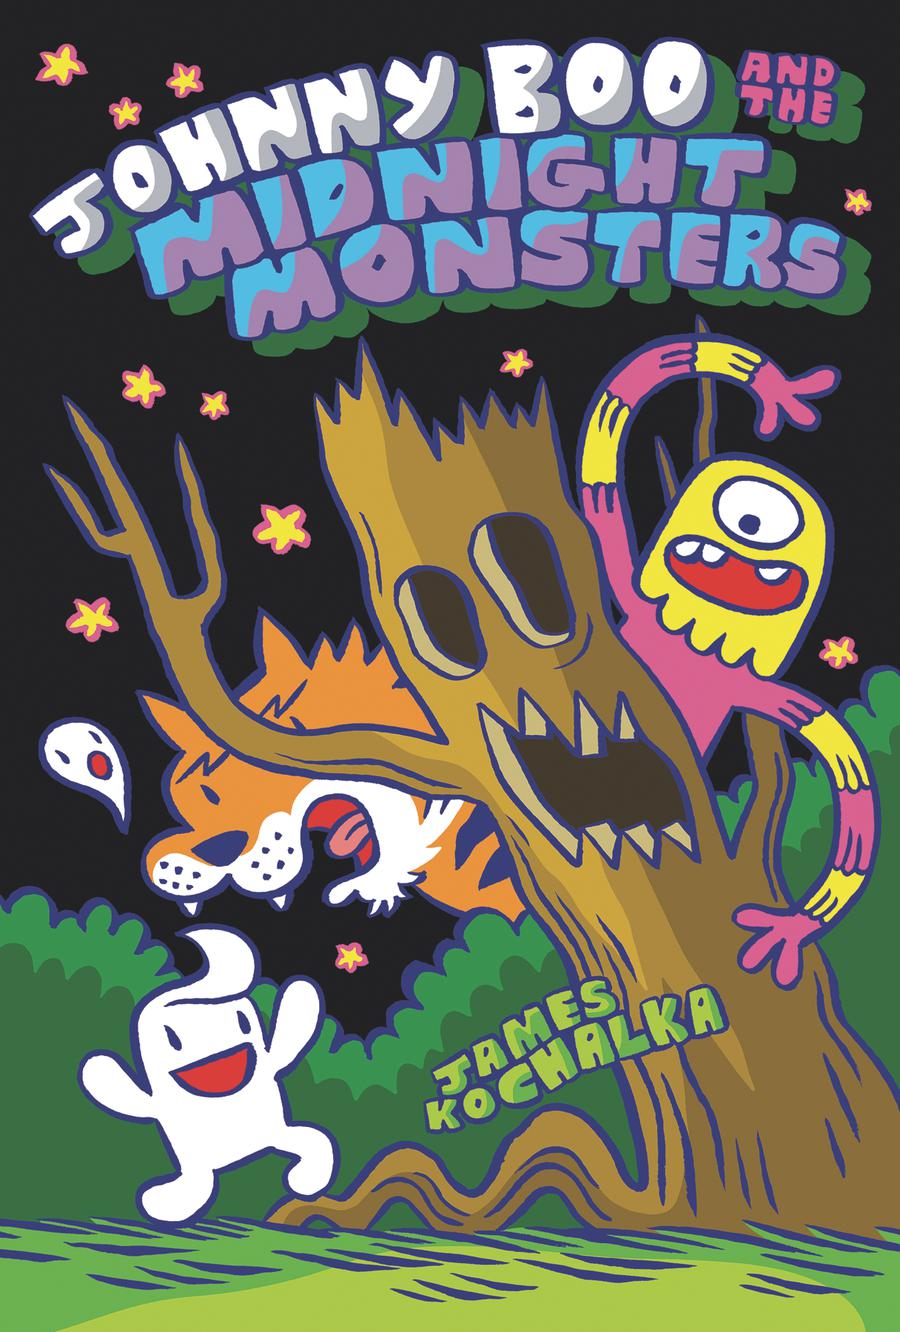 Johnny Boo Vol 10 Johnny Boo And The Midnight Monsters HC